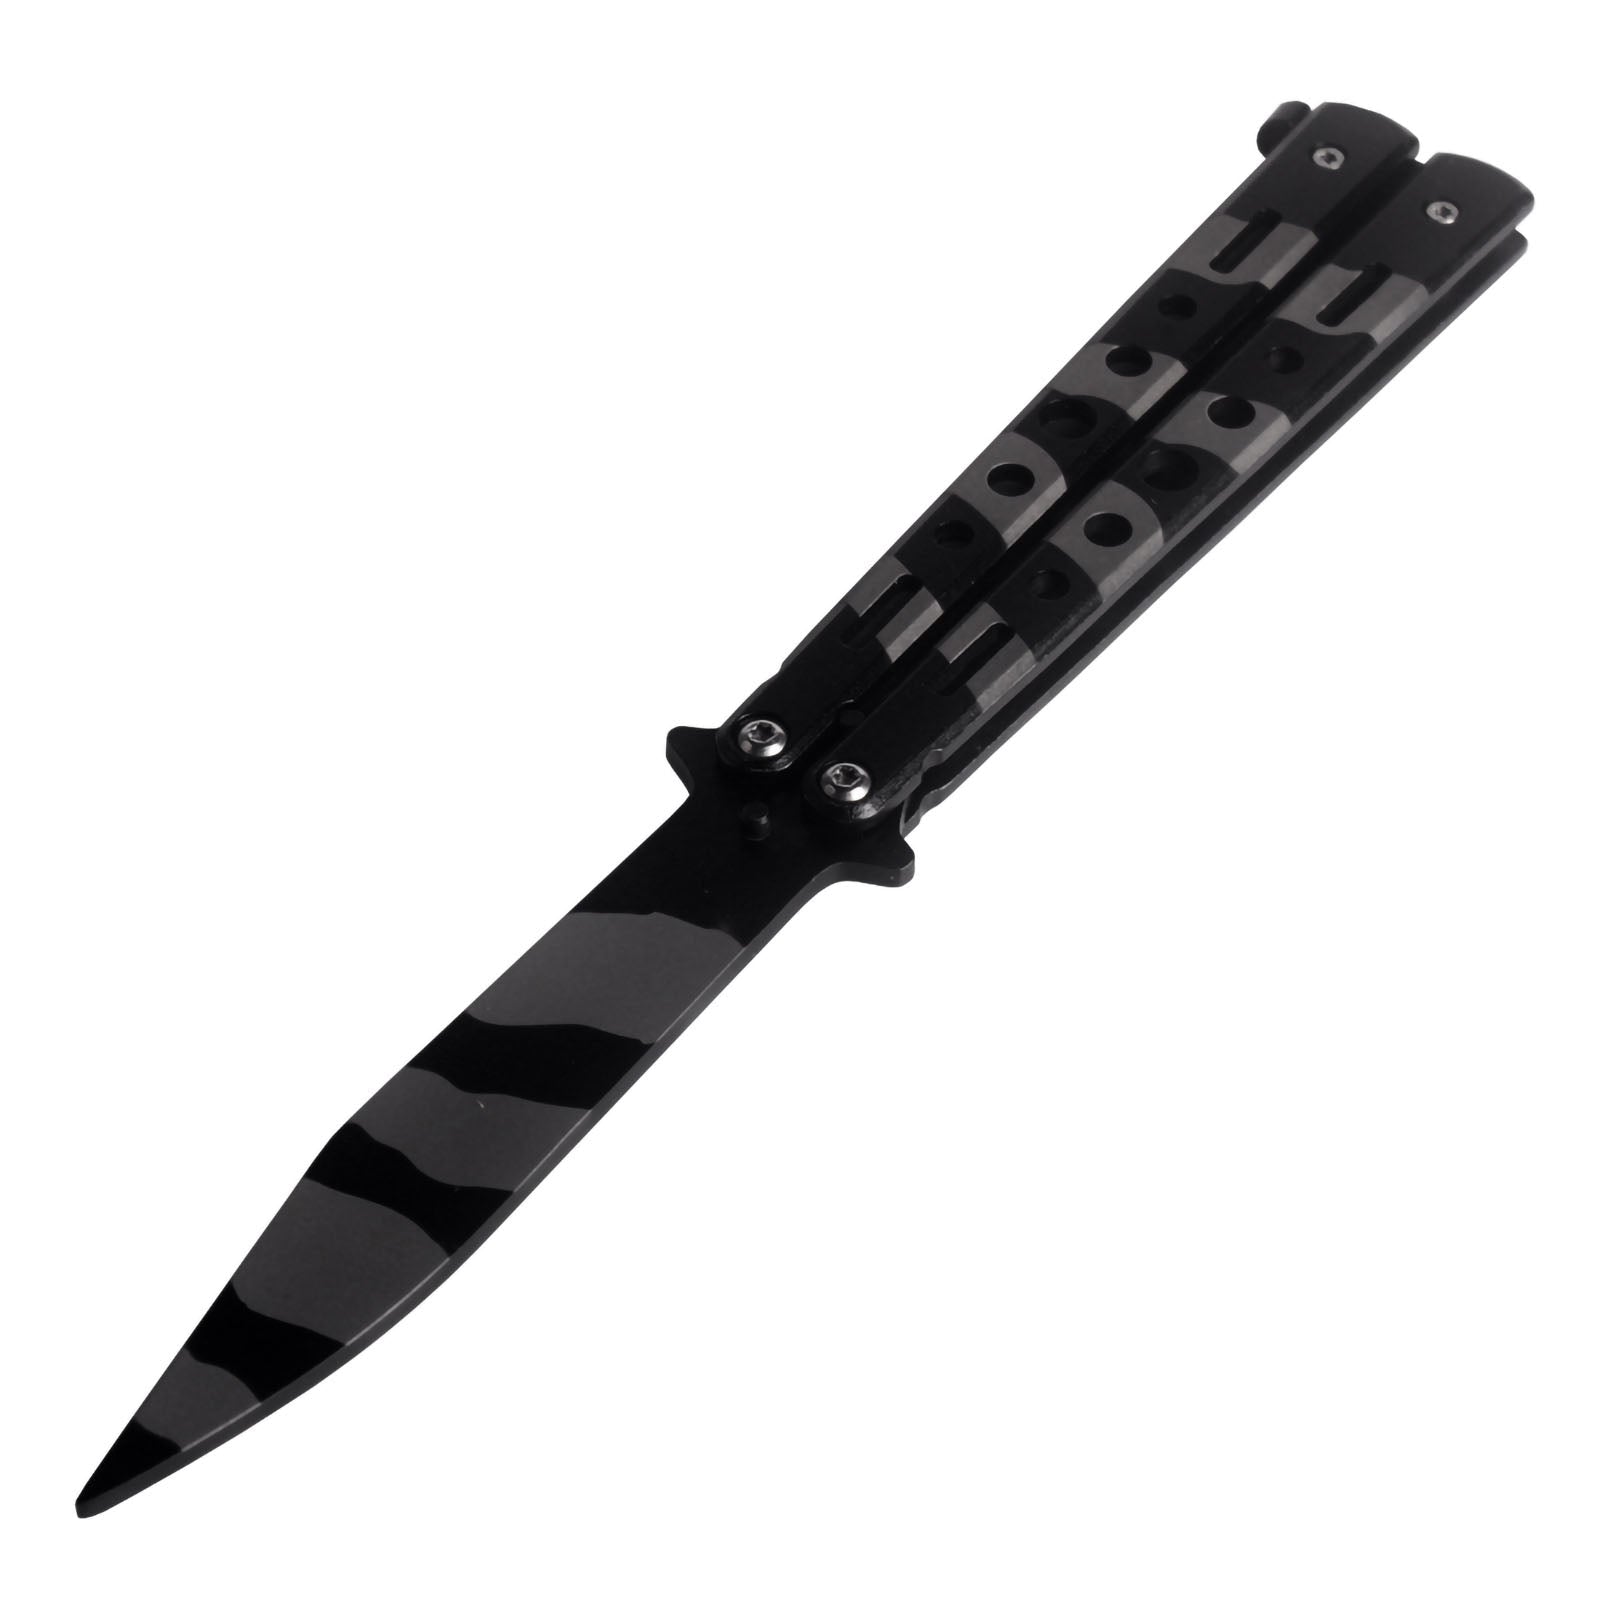 Andux Balisong Practice Trainer  CS/HDD12 (Black) (Not Available in the UK)